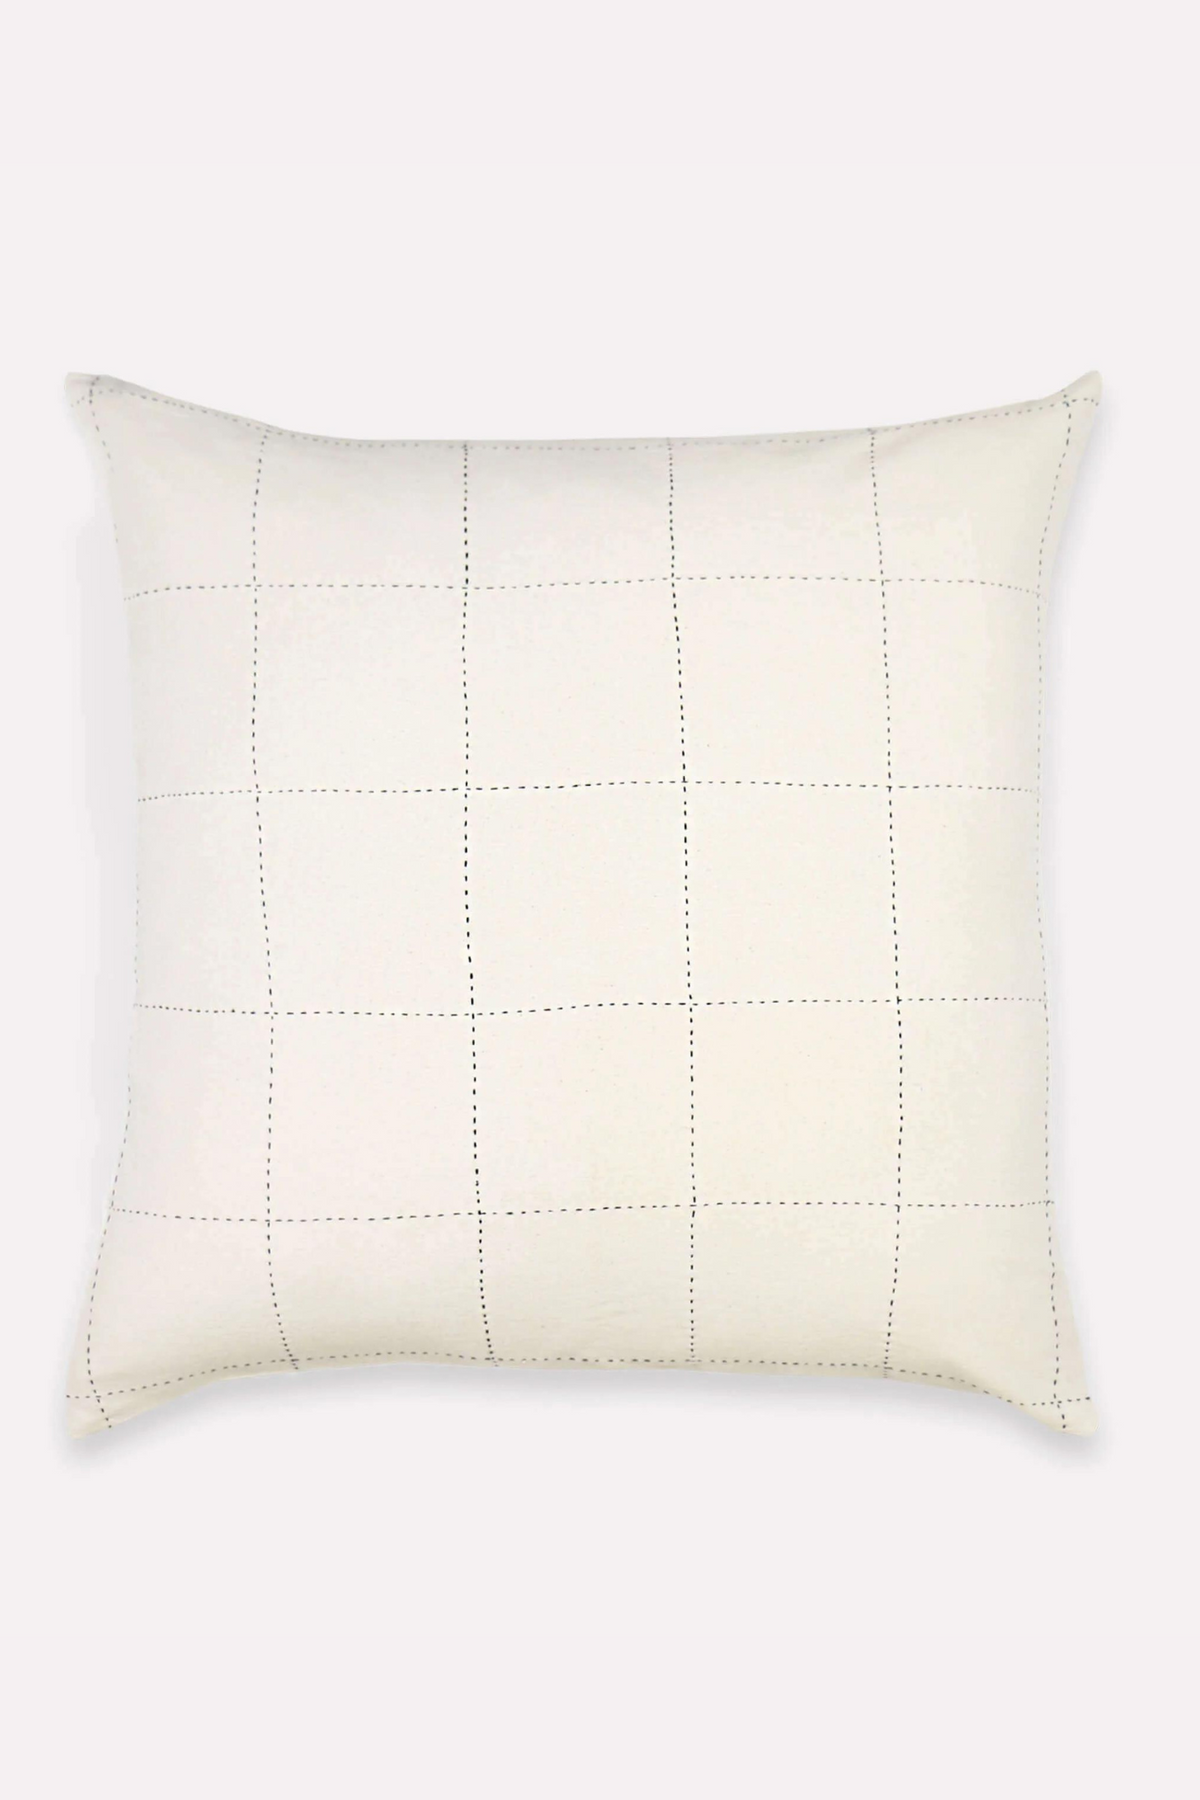 Anchal Project Grid-Stitch Throw Pillow Cover